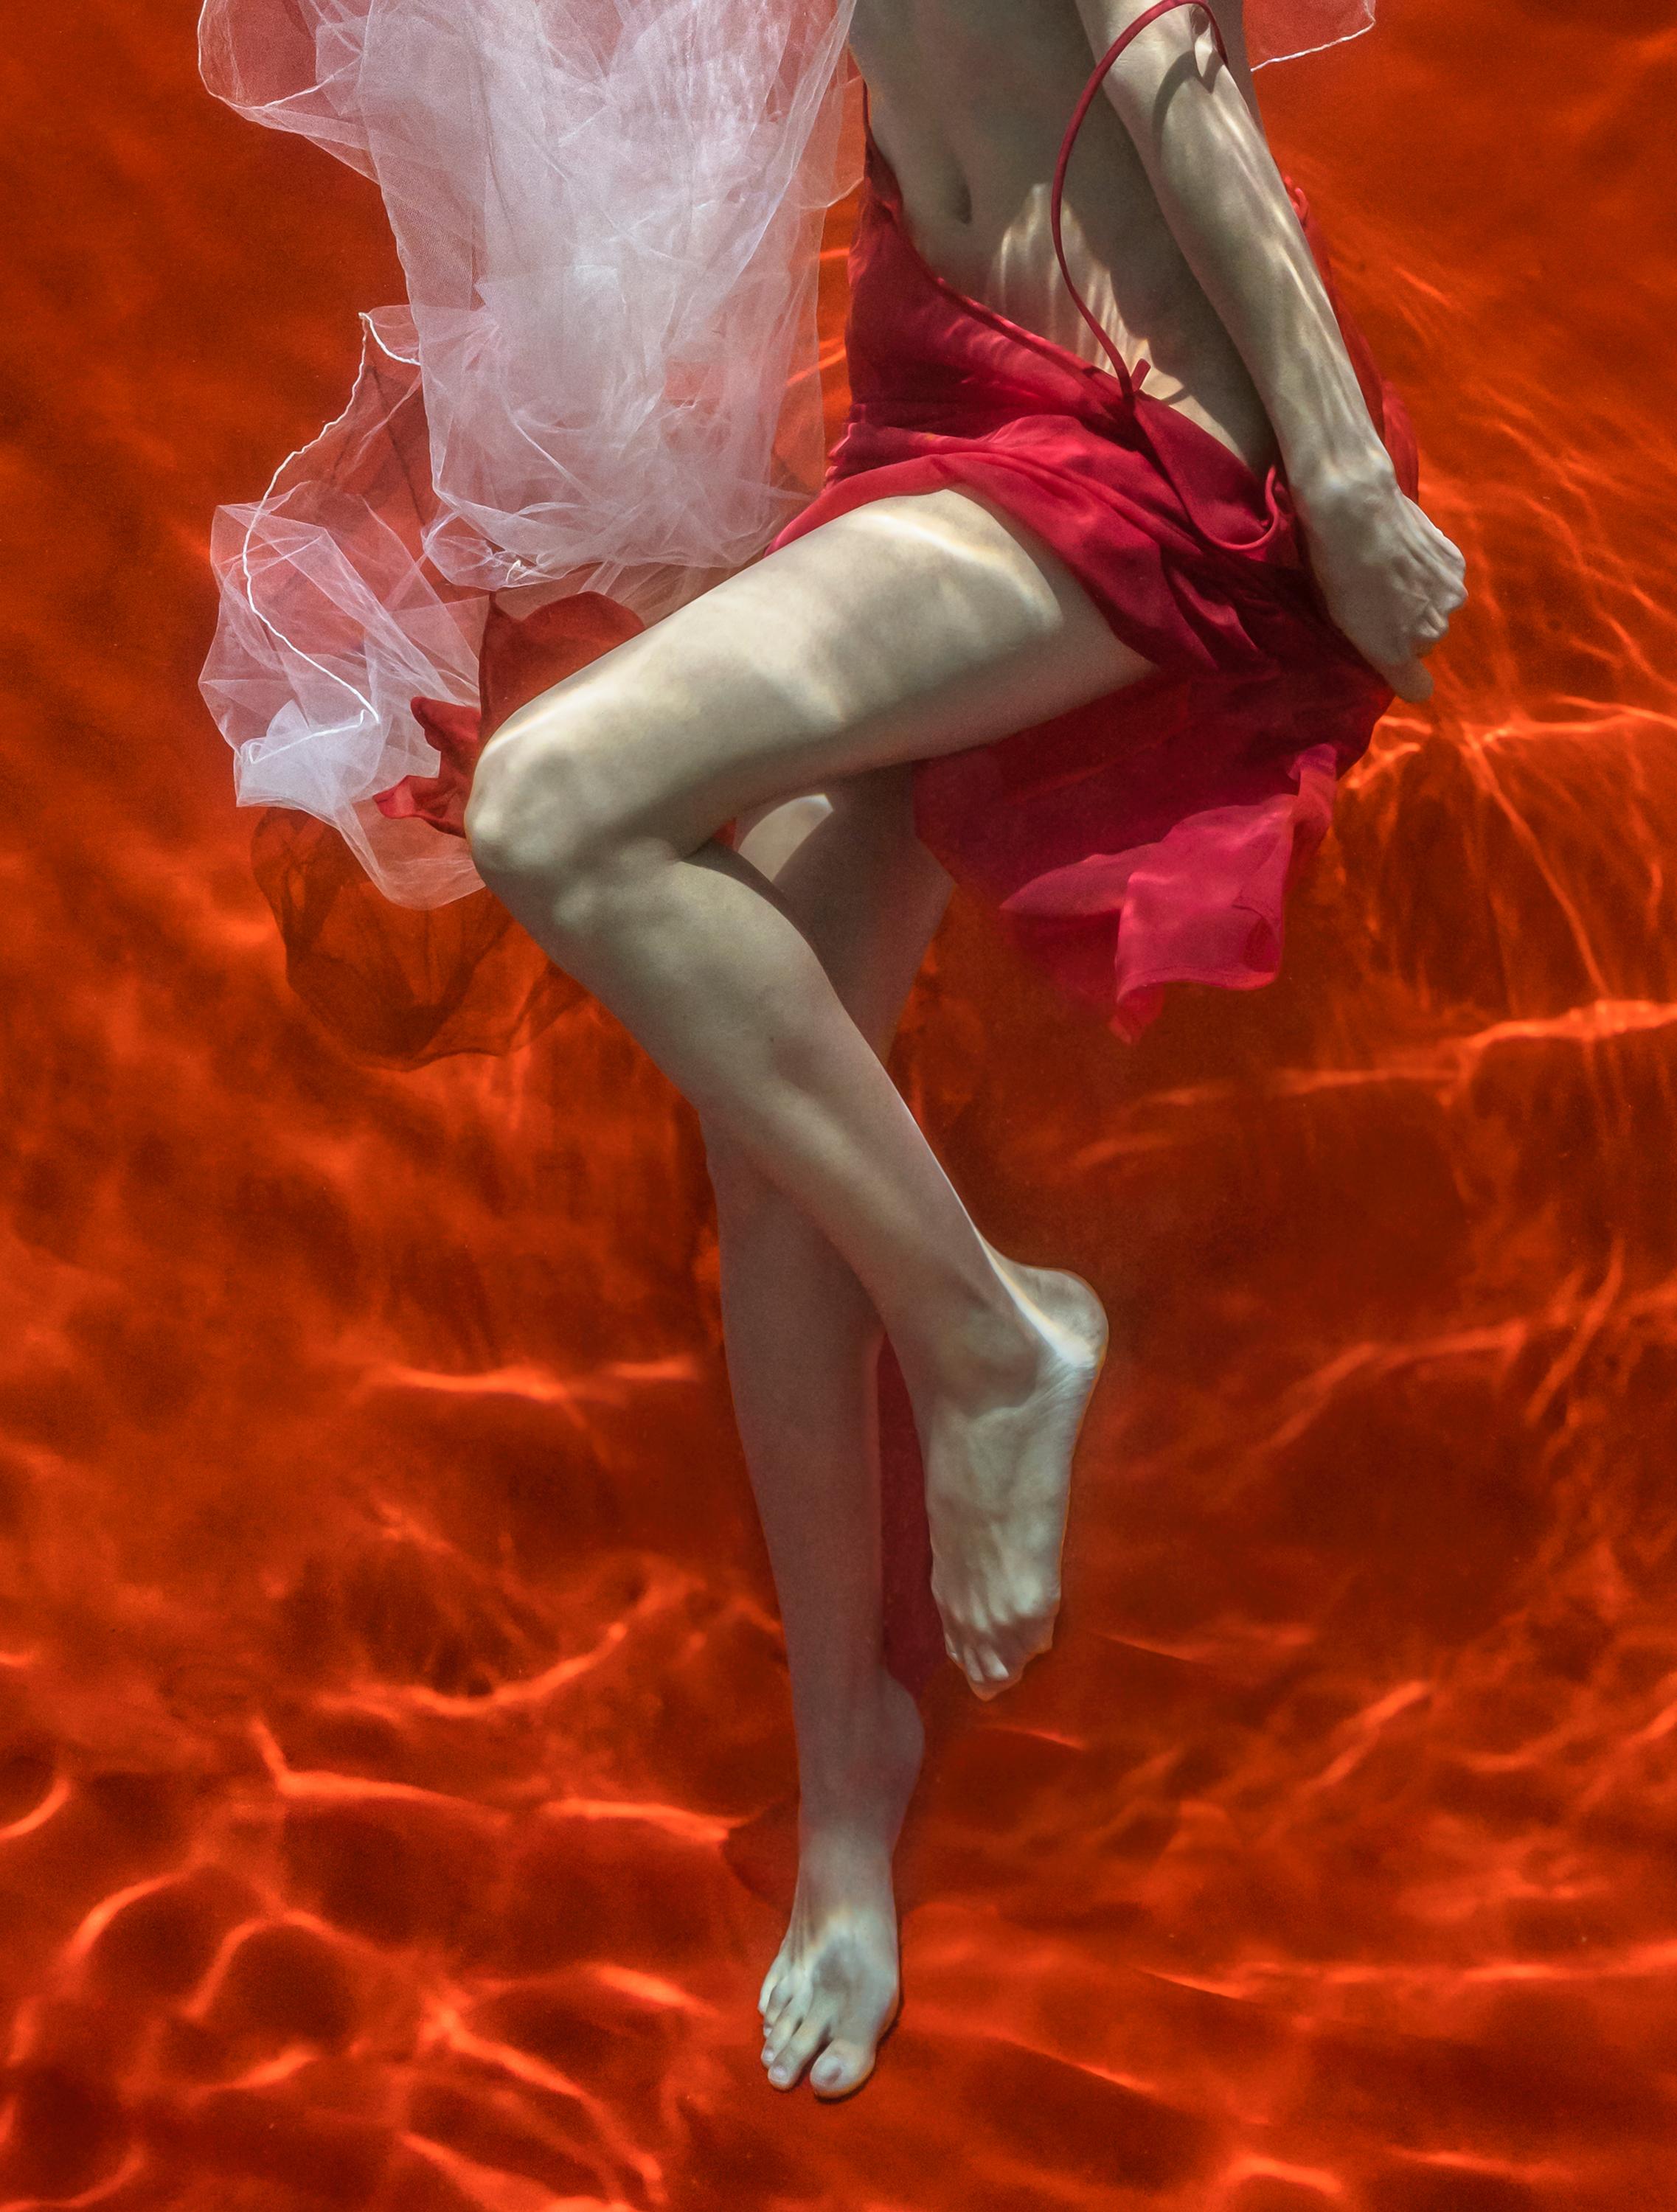 Blood and Milk III - underwater nude photograph - print on paper 60x43